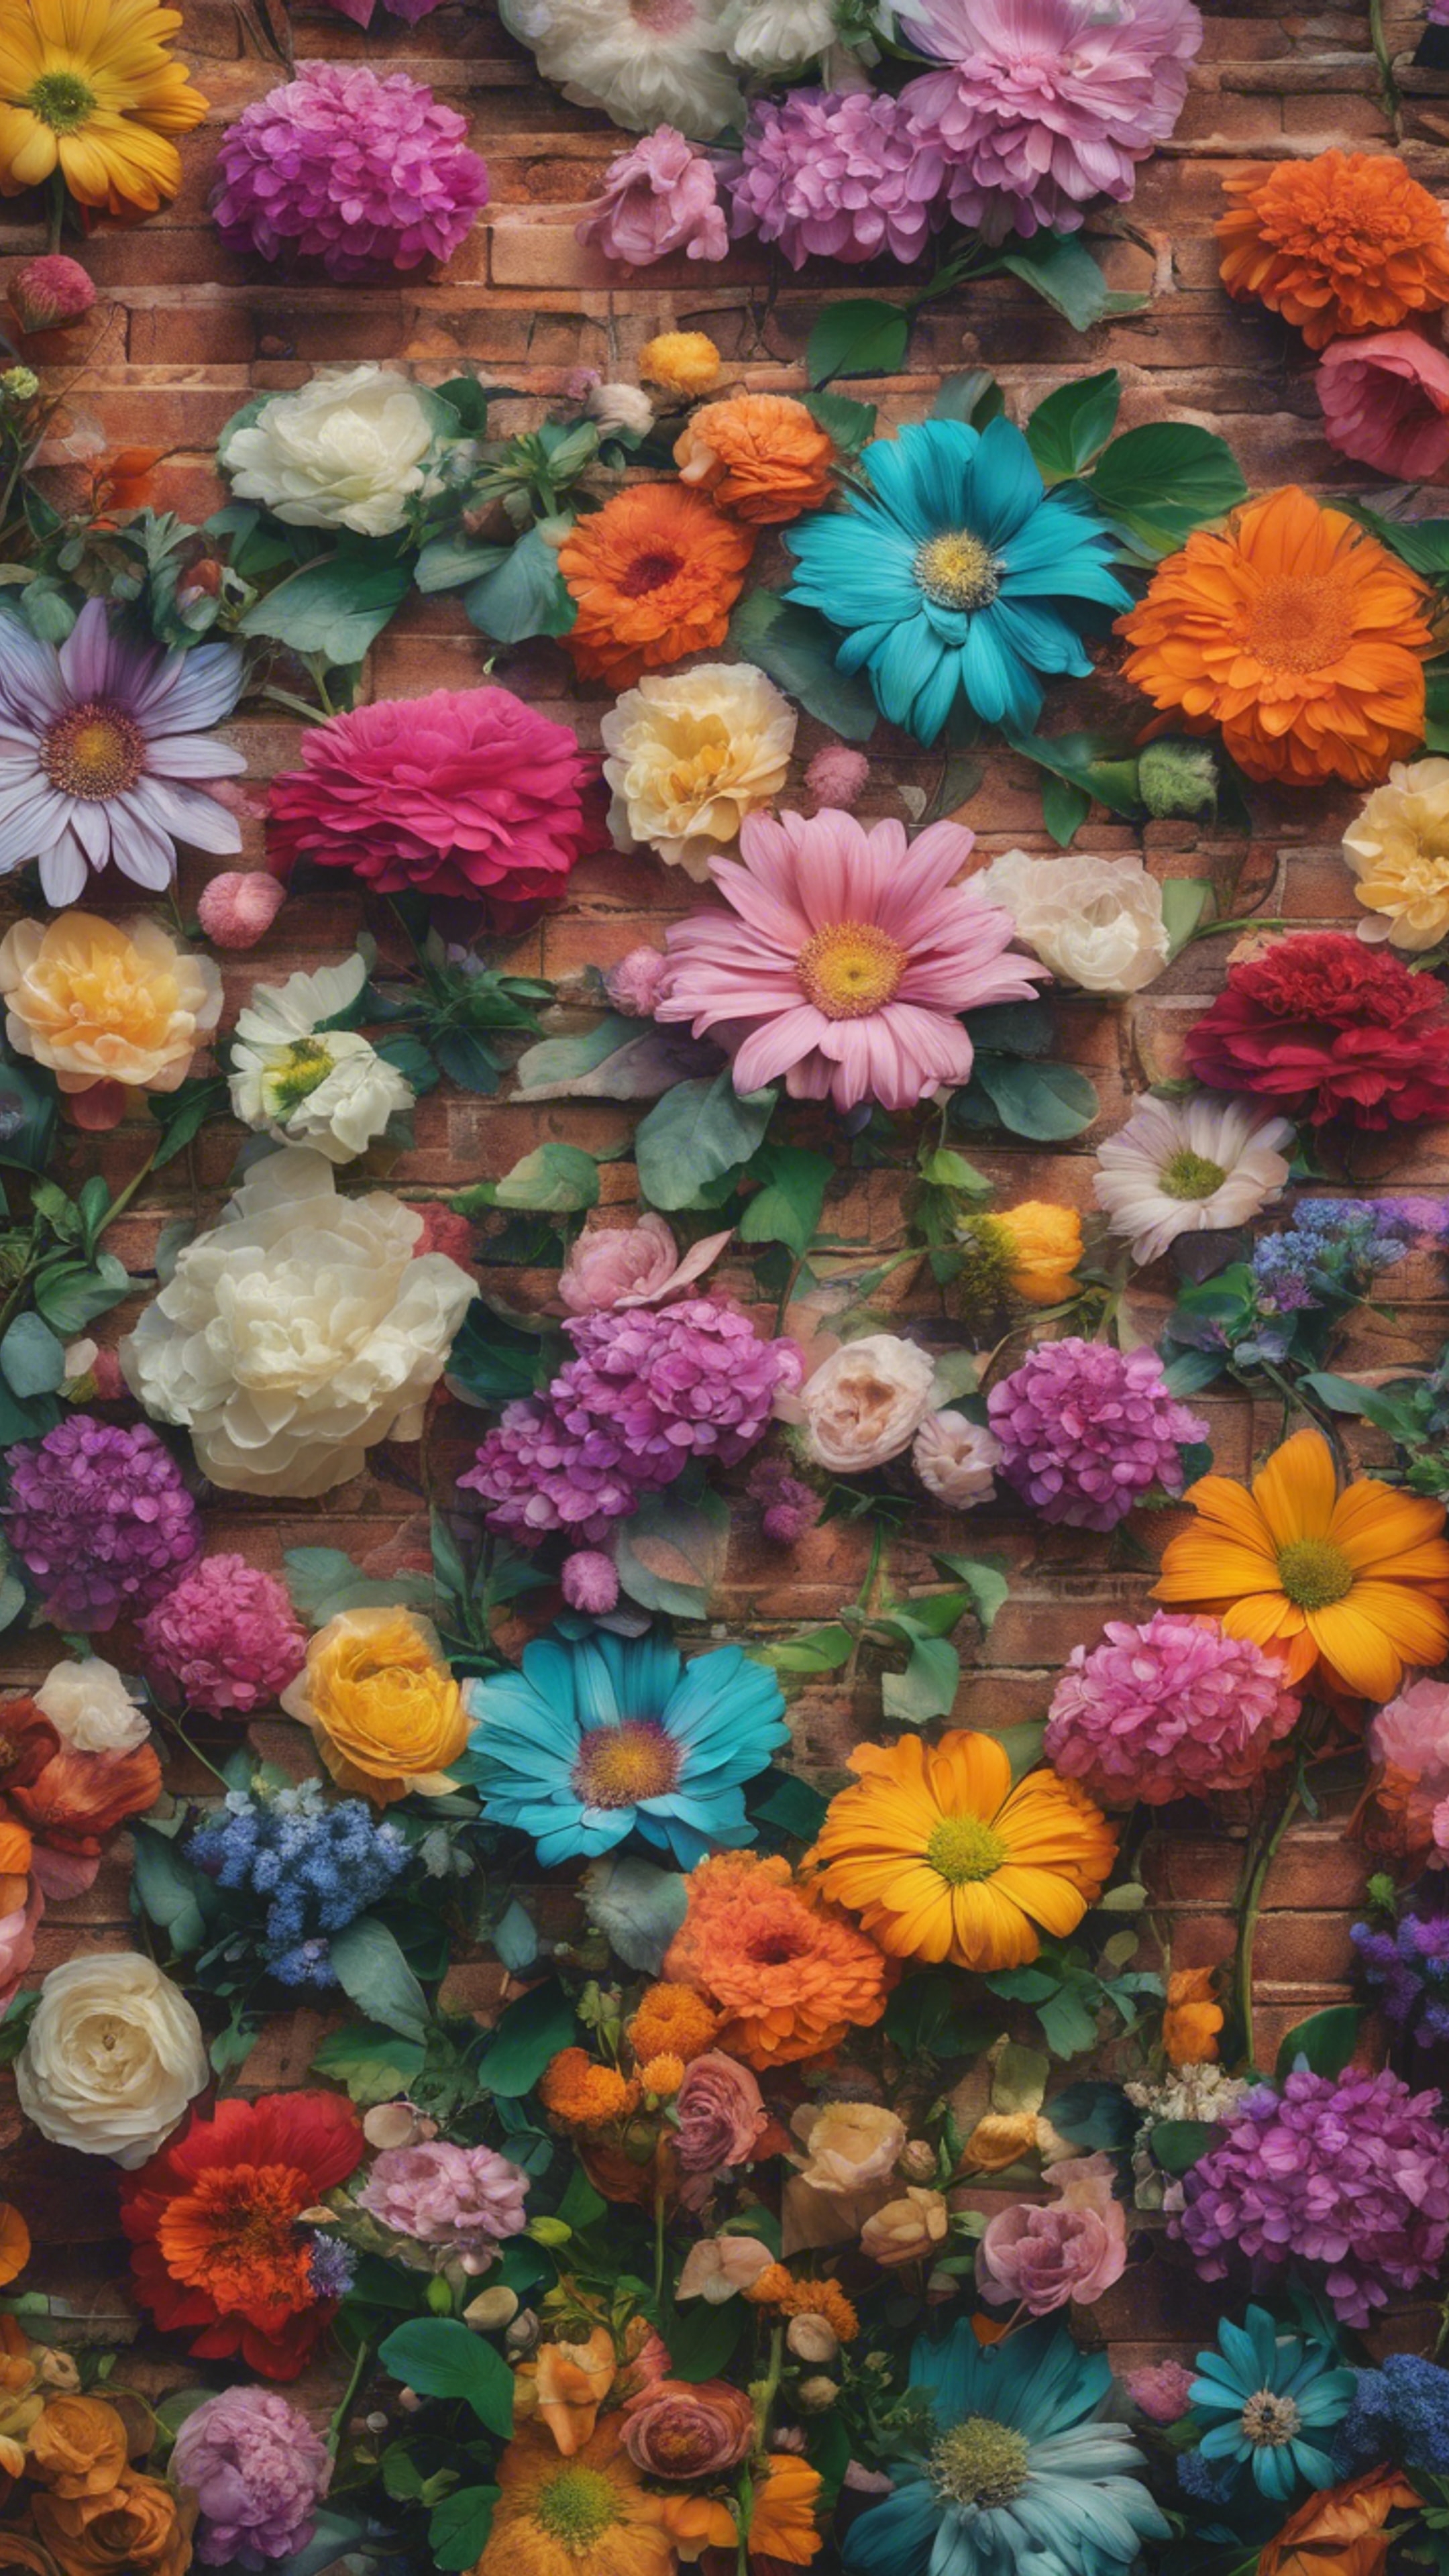 A large floral mural painted on an old brick wall, filled with vibrant colors and varying species of flowers.壁紙[e335291140e24218a496]